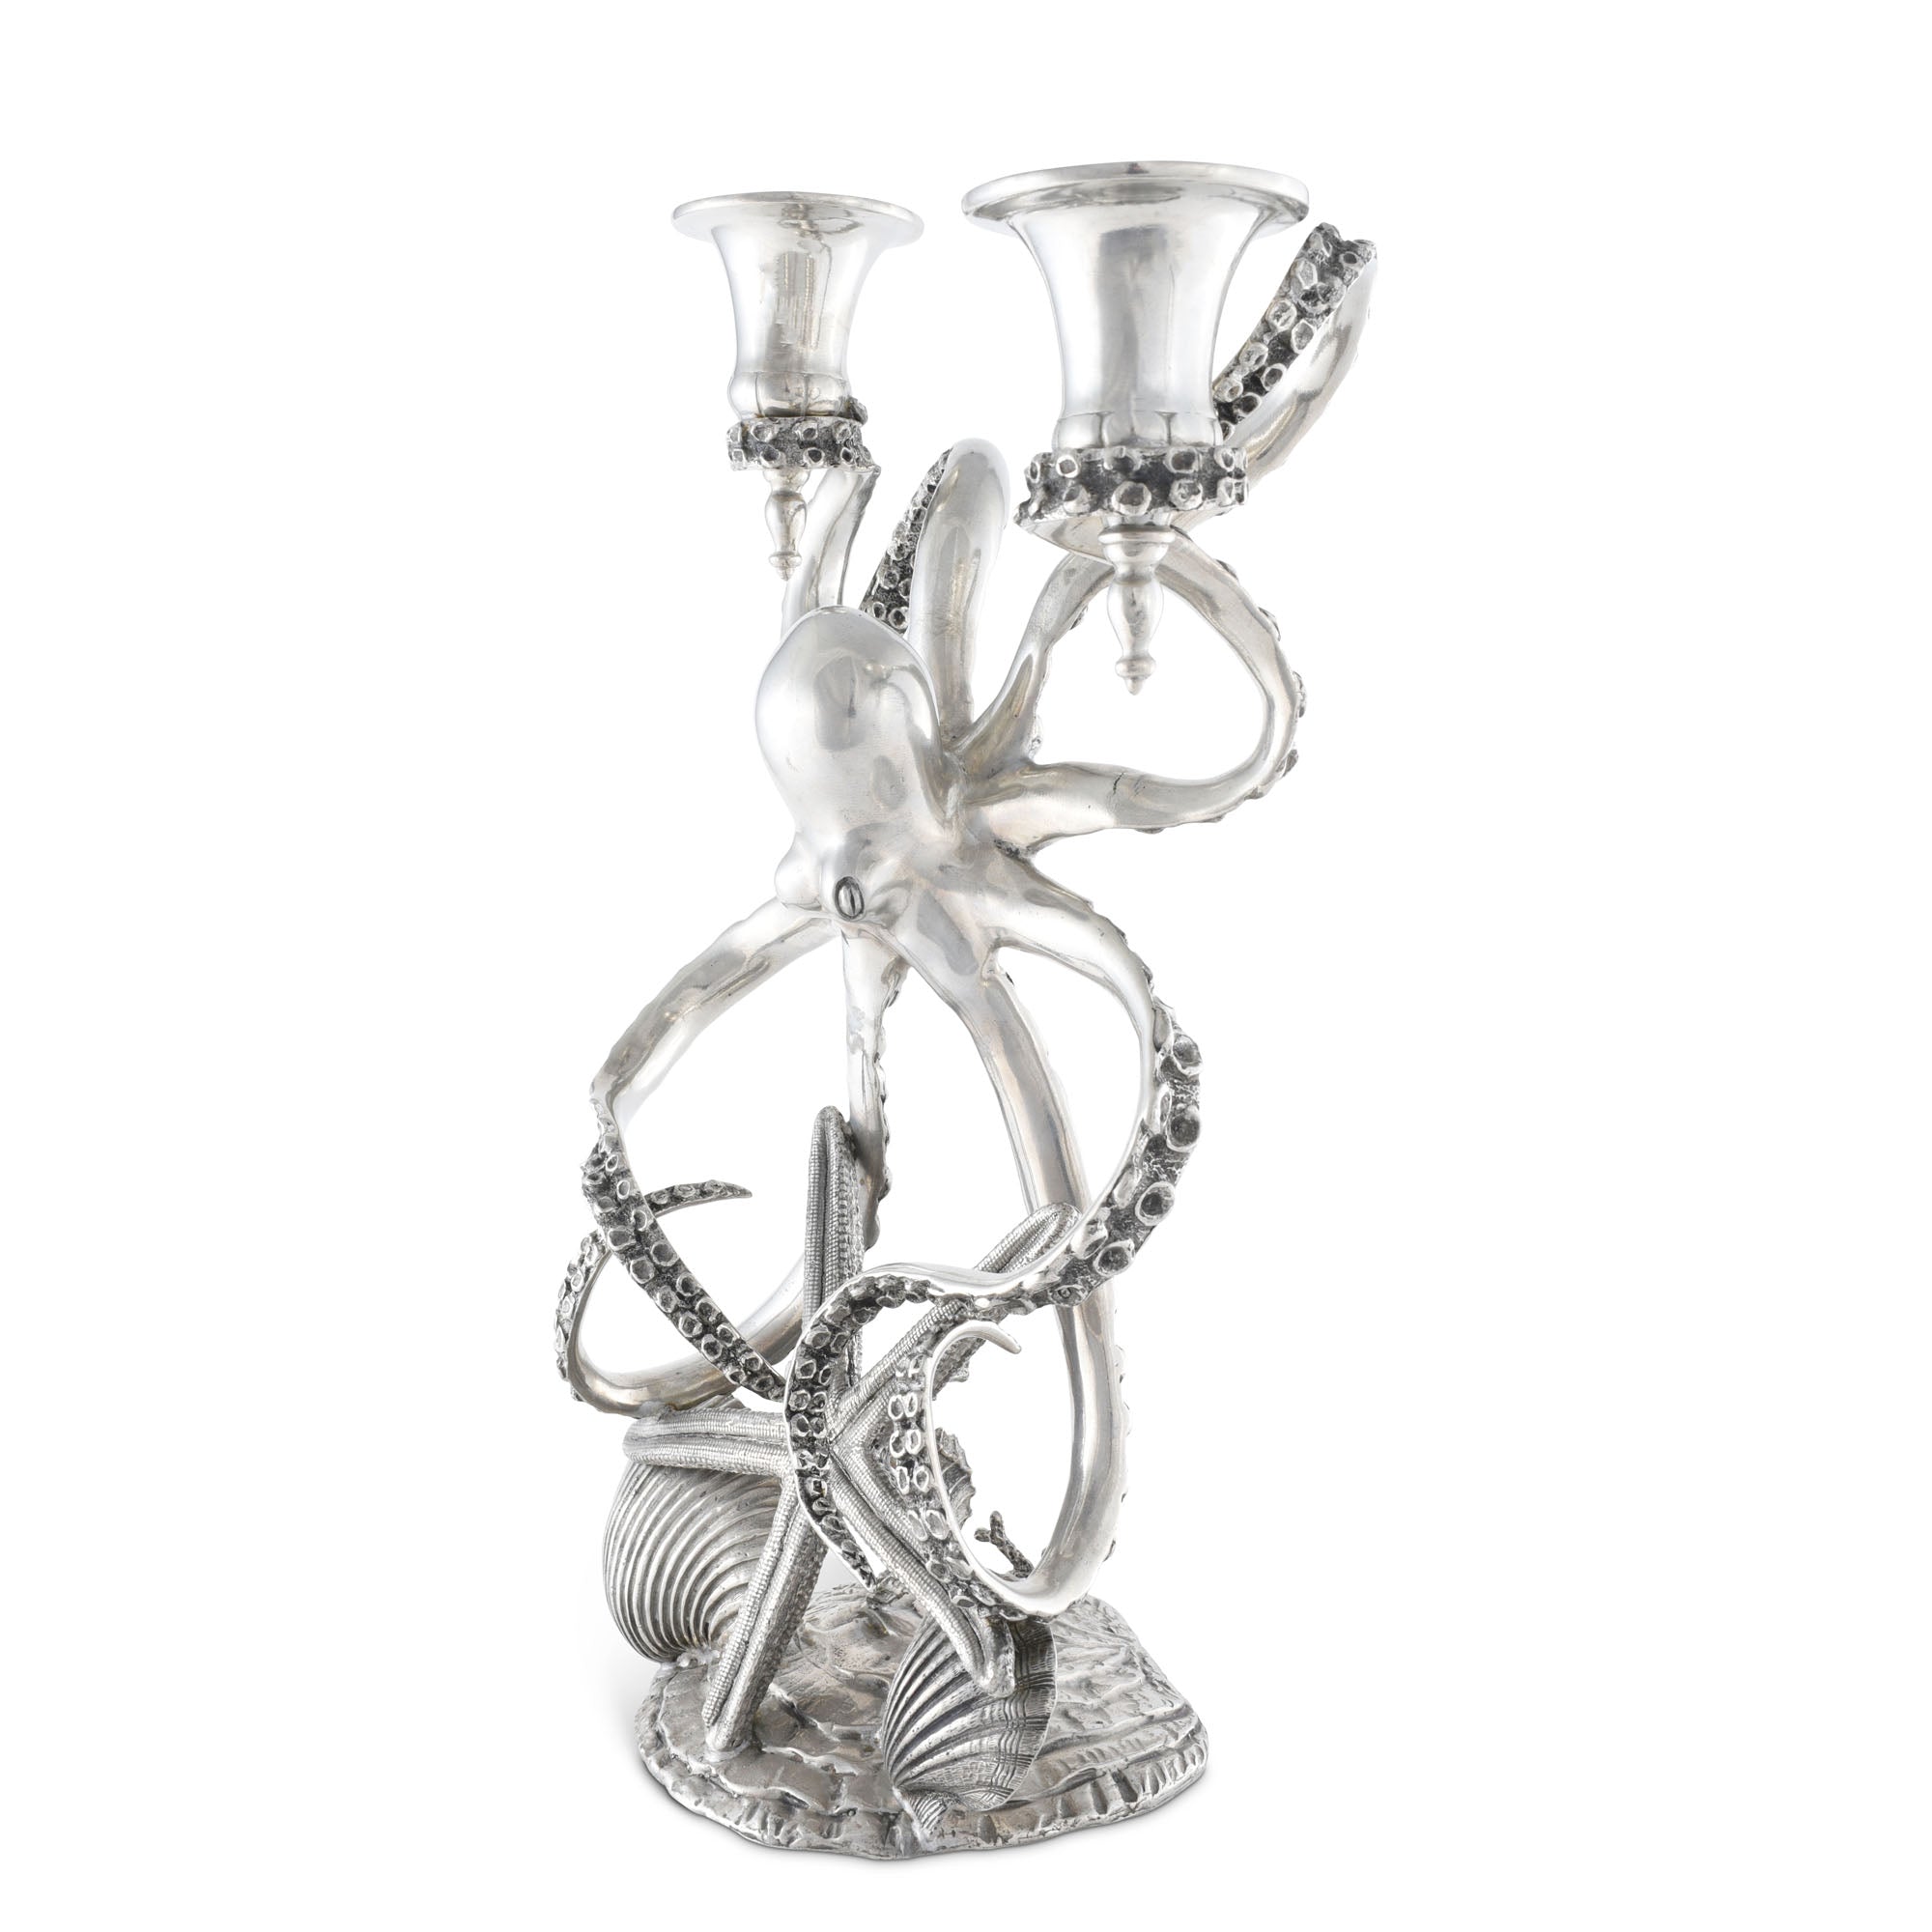 Vagabond House Two Taper Pewter Octopus Candelabrum Product Image